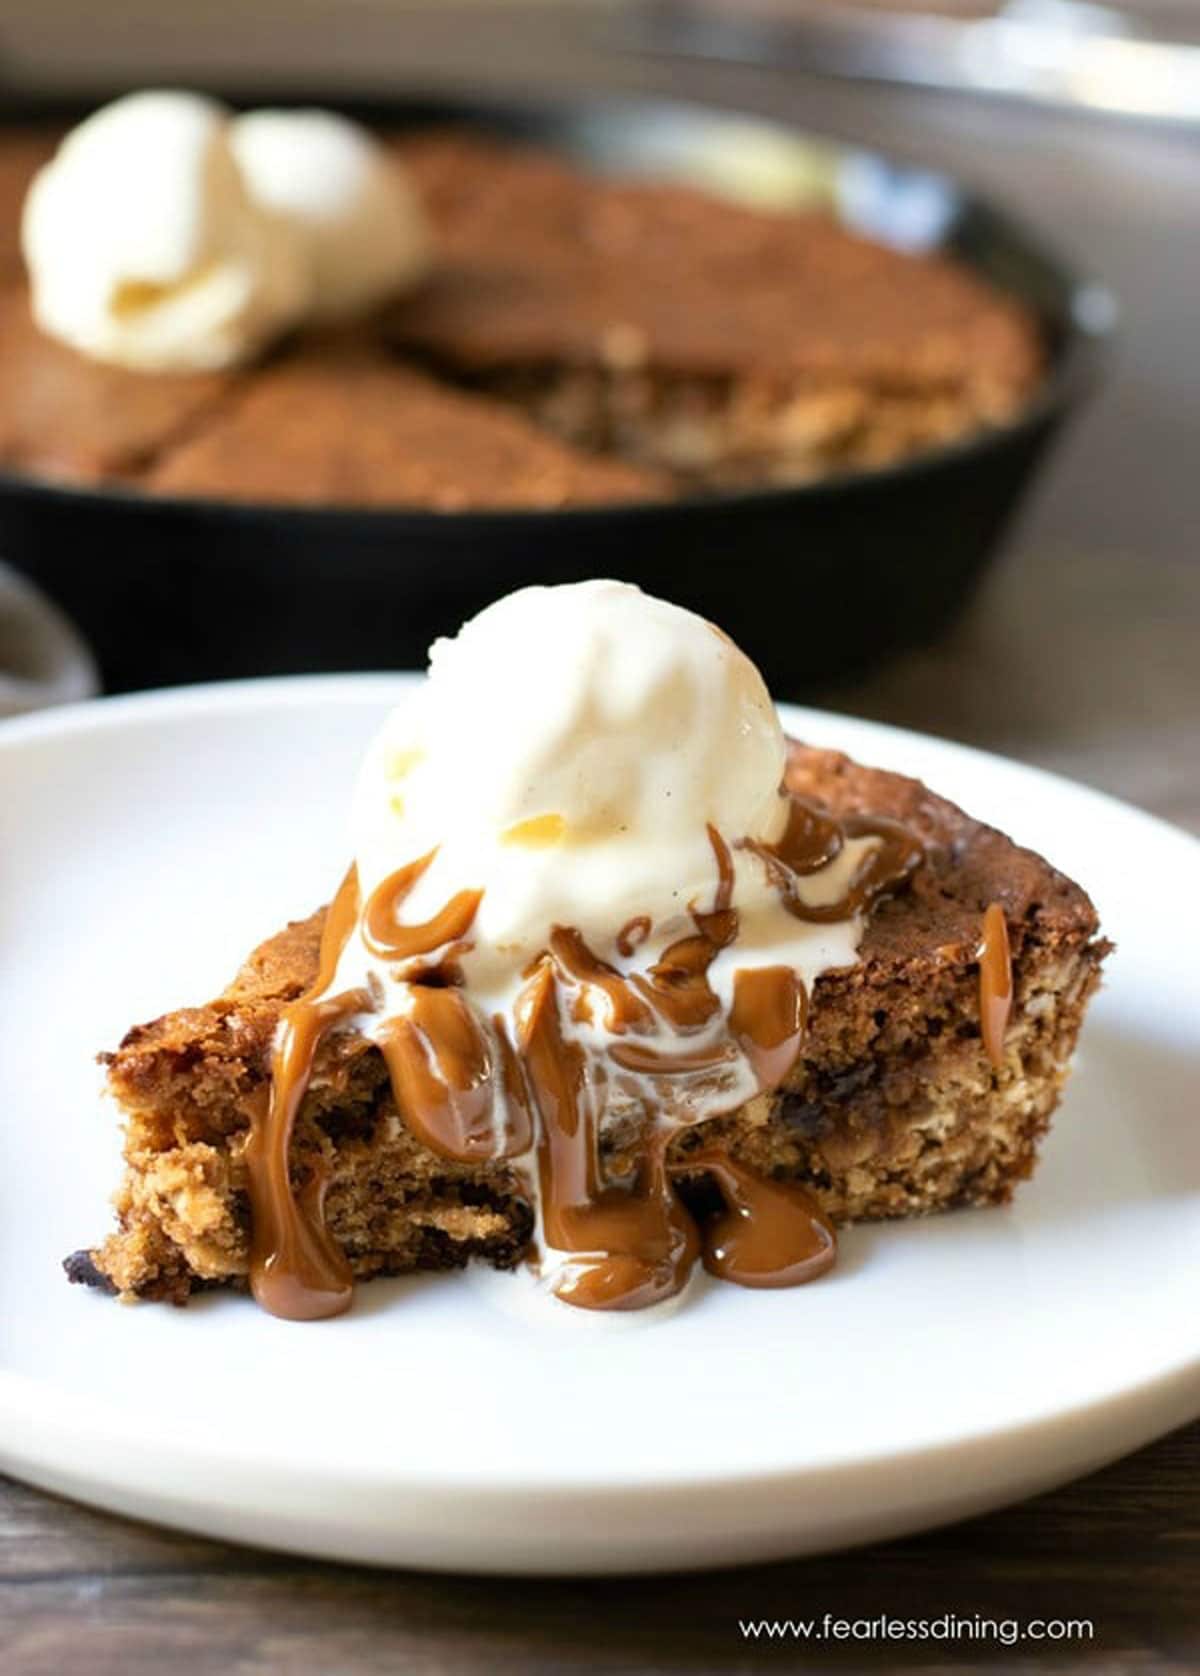 A slice of skillet cookie on a plate. It is topped with a scoop of ice cream and hot caramel.